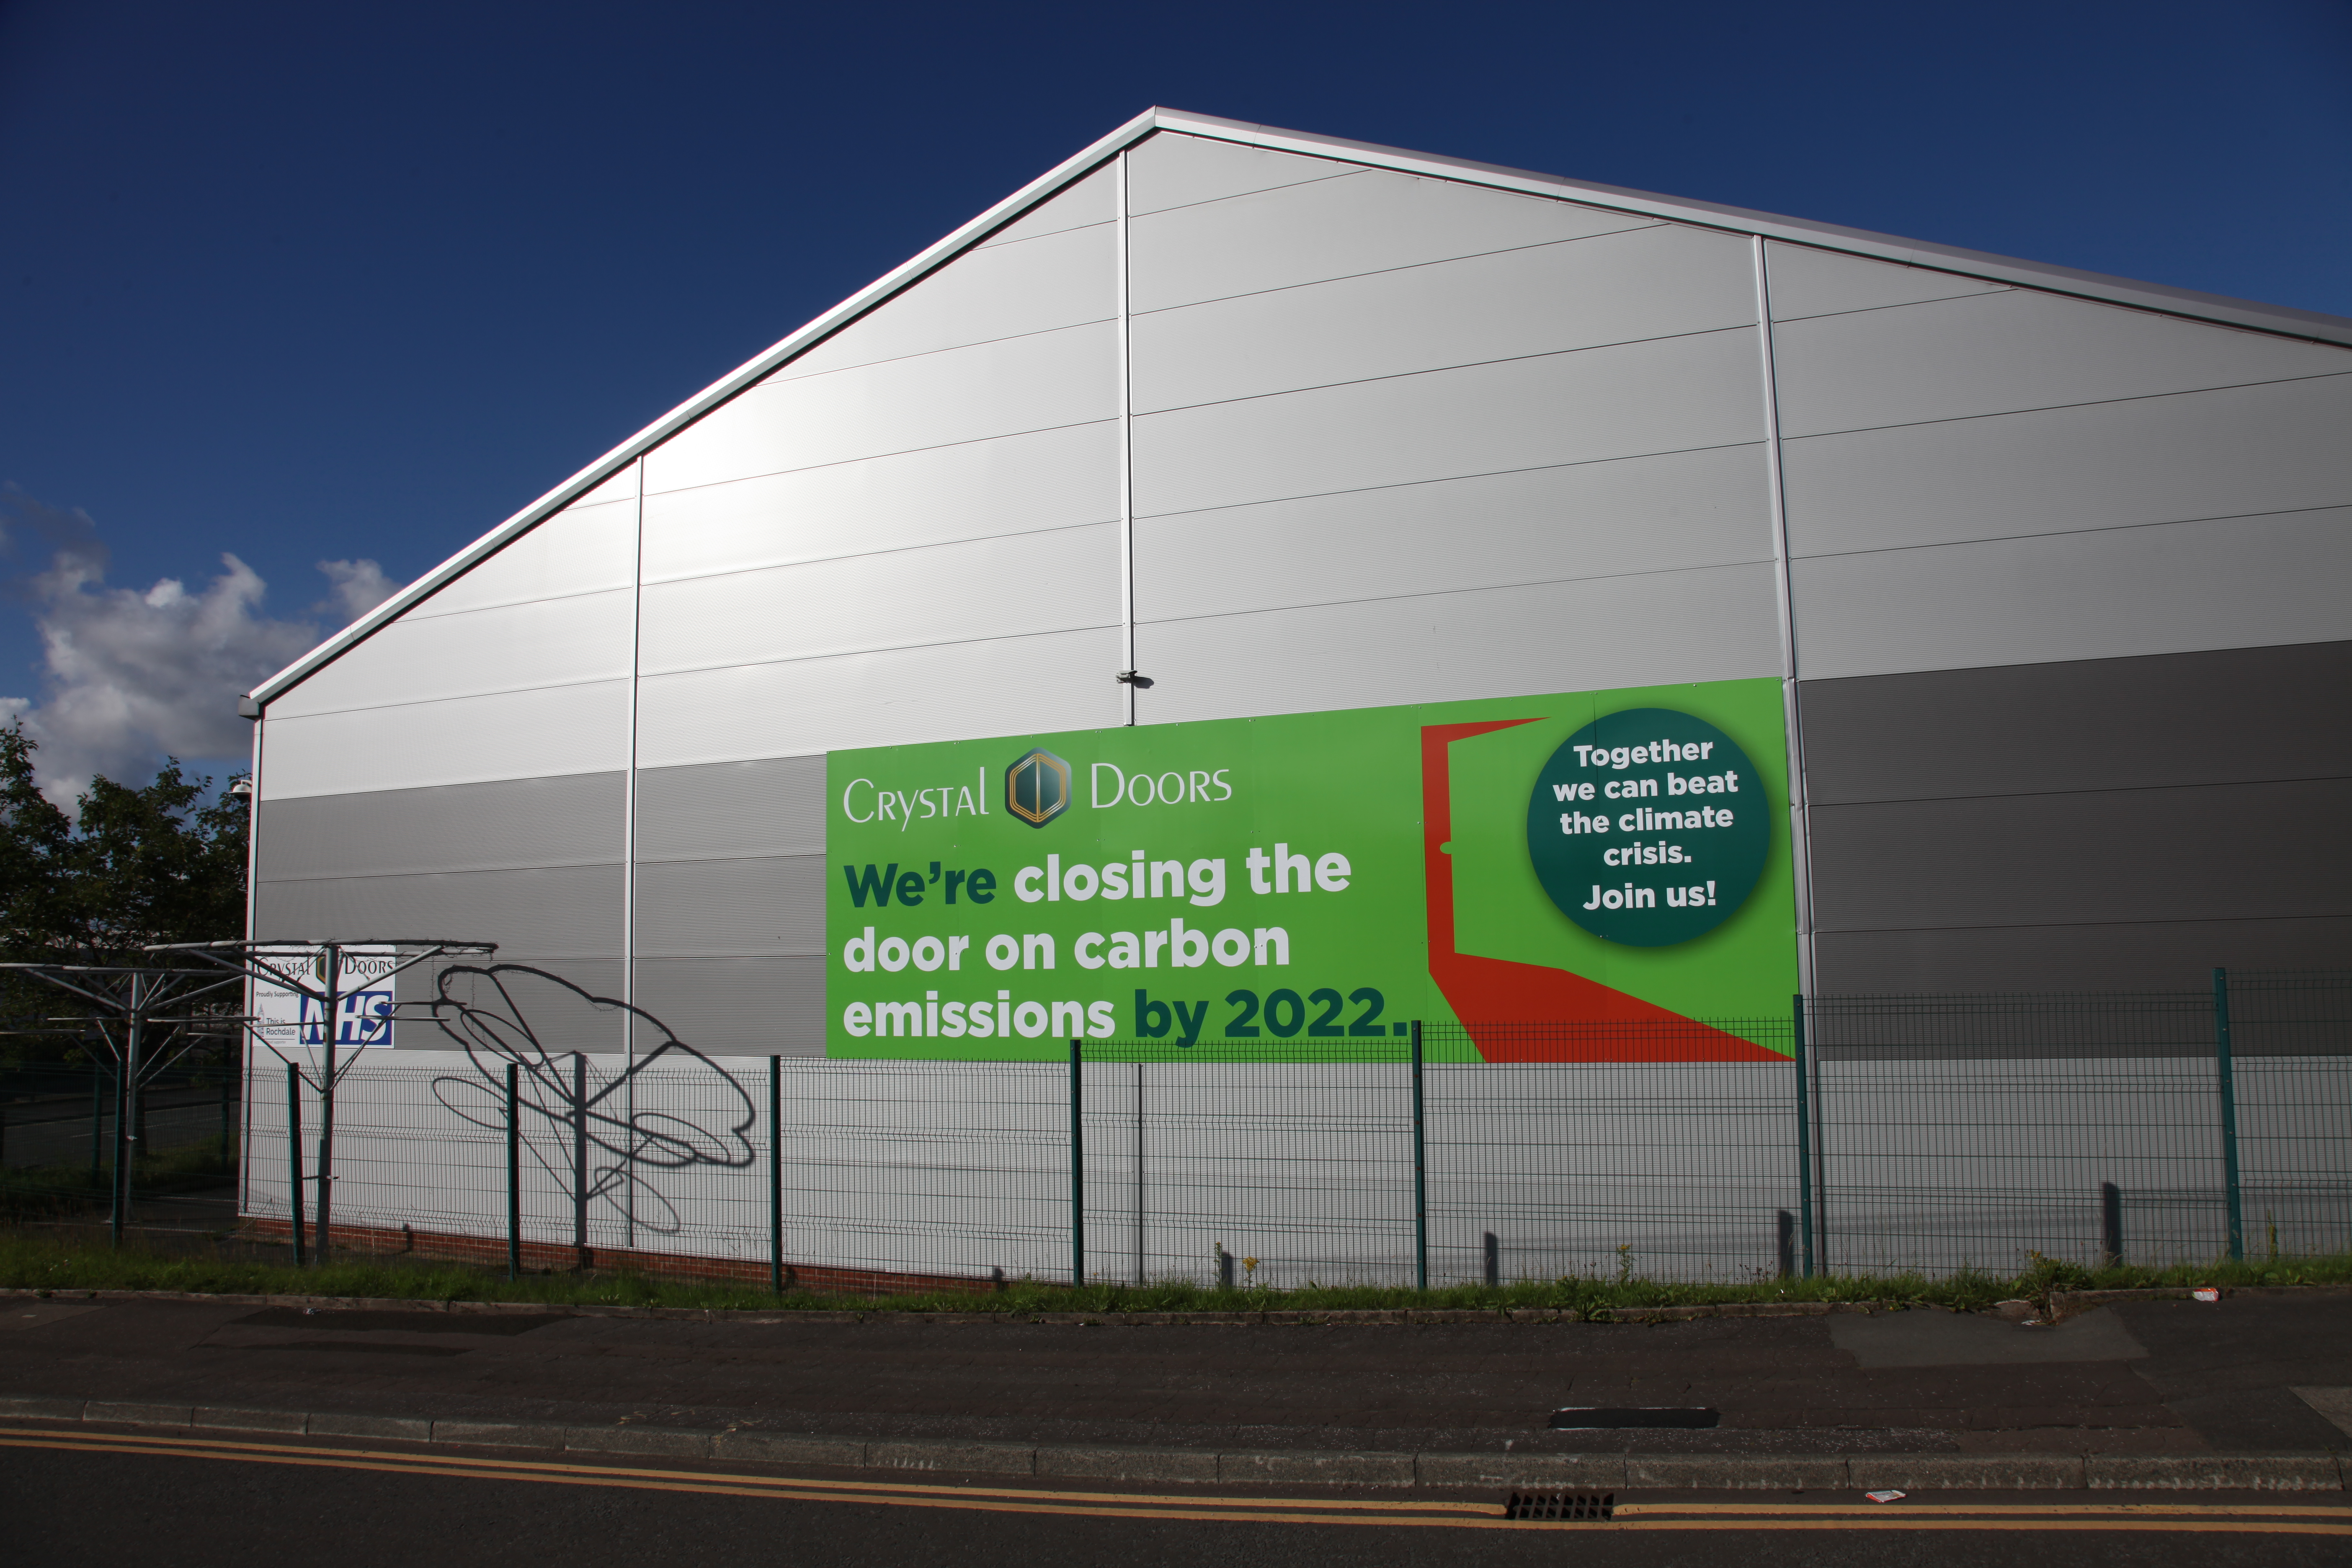 Image: Manufacturer pledges to be carbon neutral by 2022